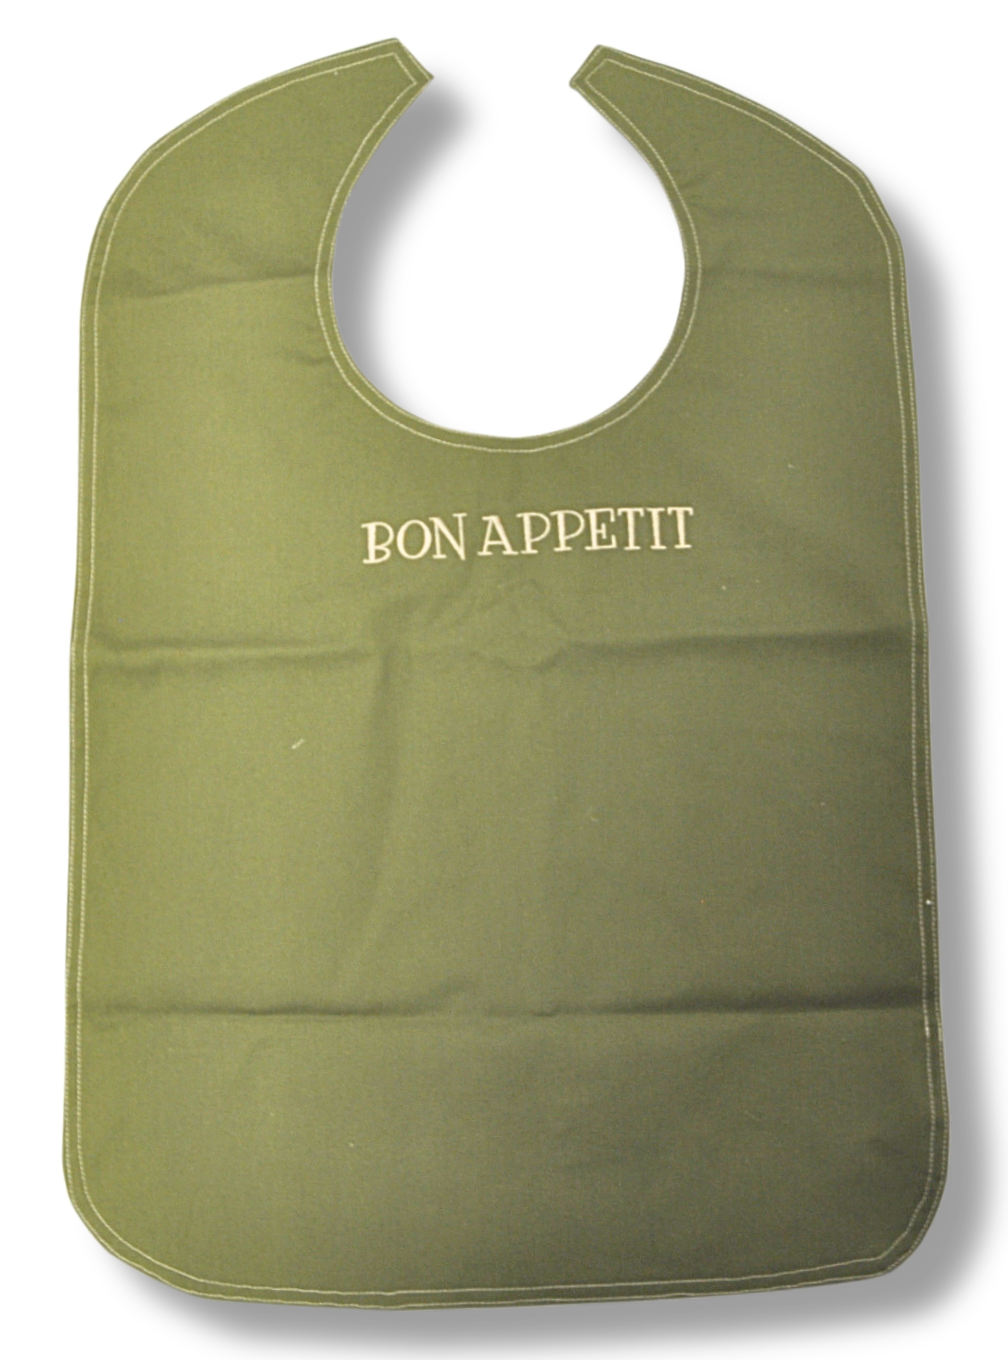 Bibs for Men & Women, Highly Absorbent Breathable Washable and Reusable- Fern Green with embroidery